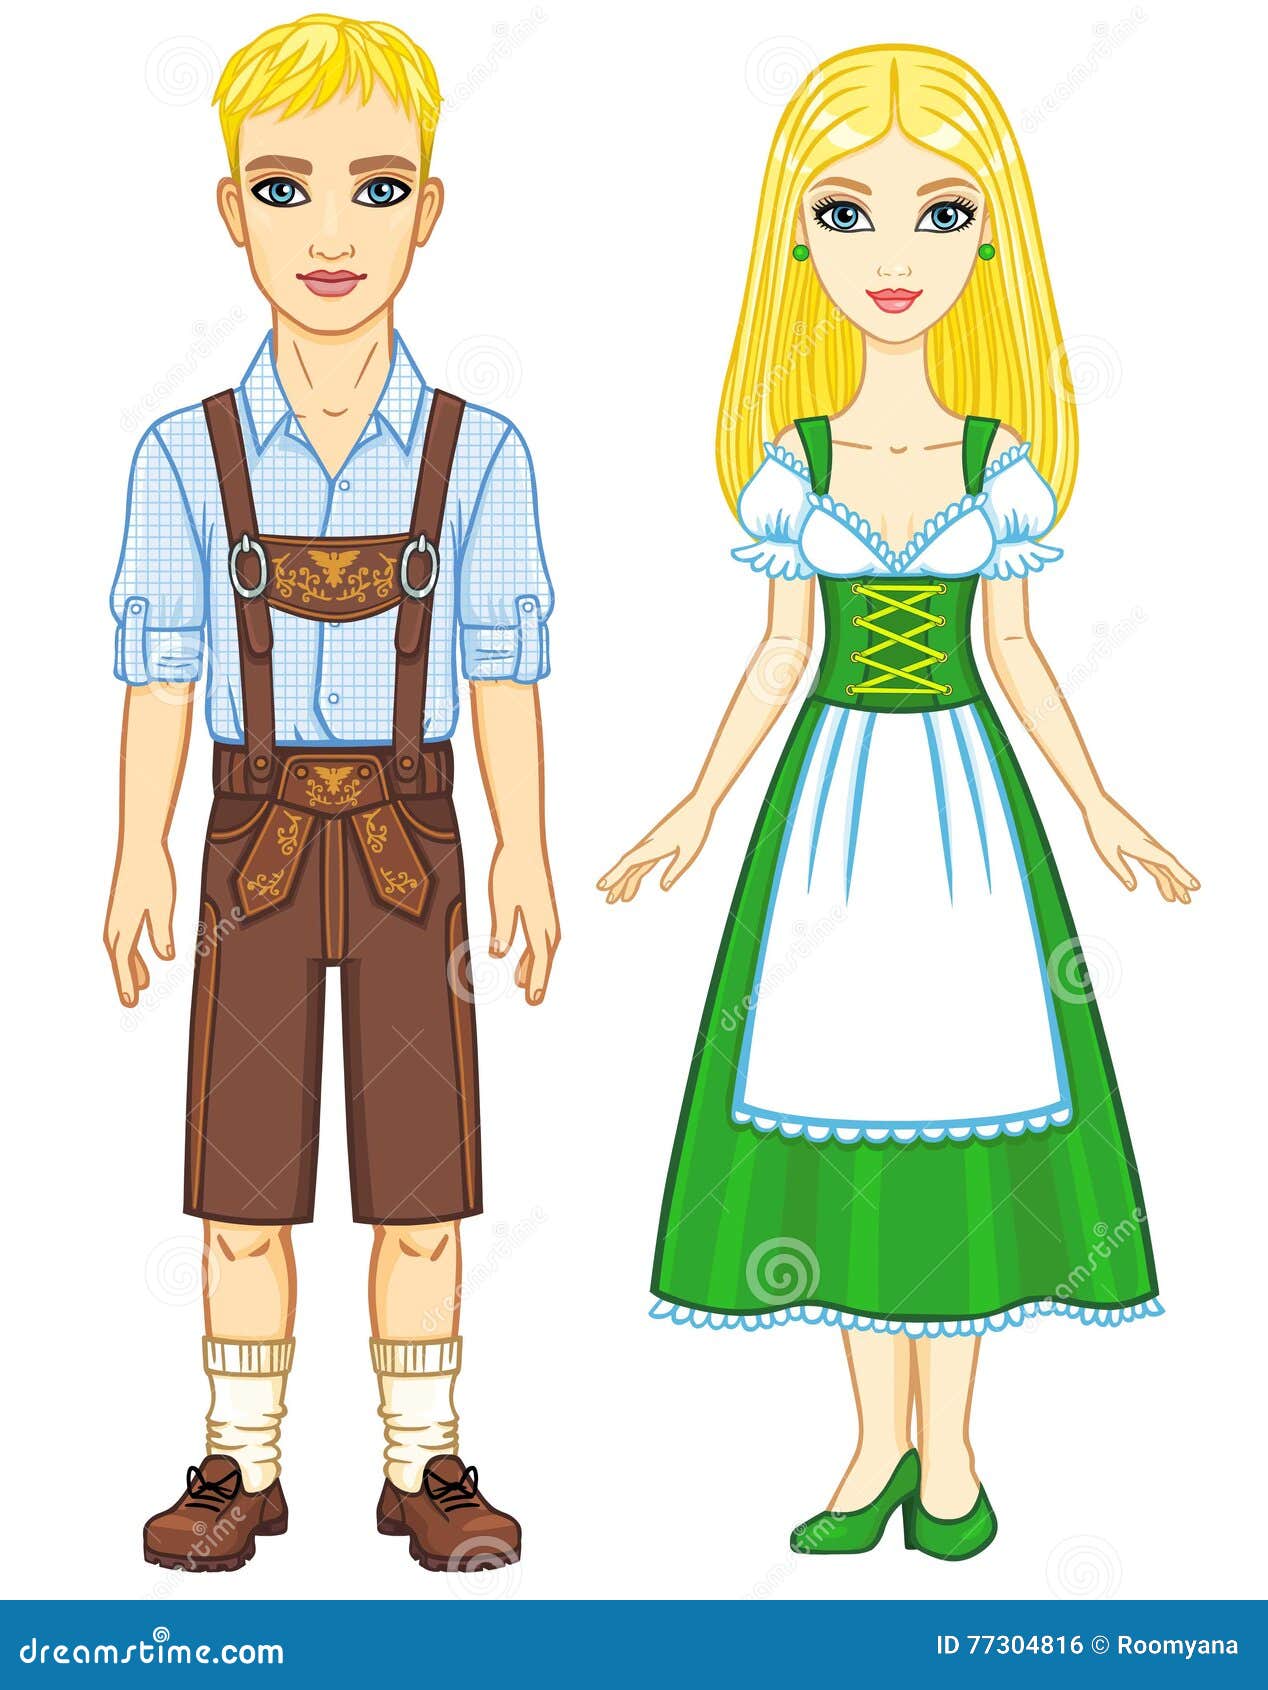 animation portrait of the bavarian family ancient traditional clothes.